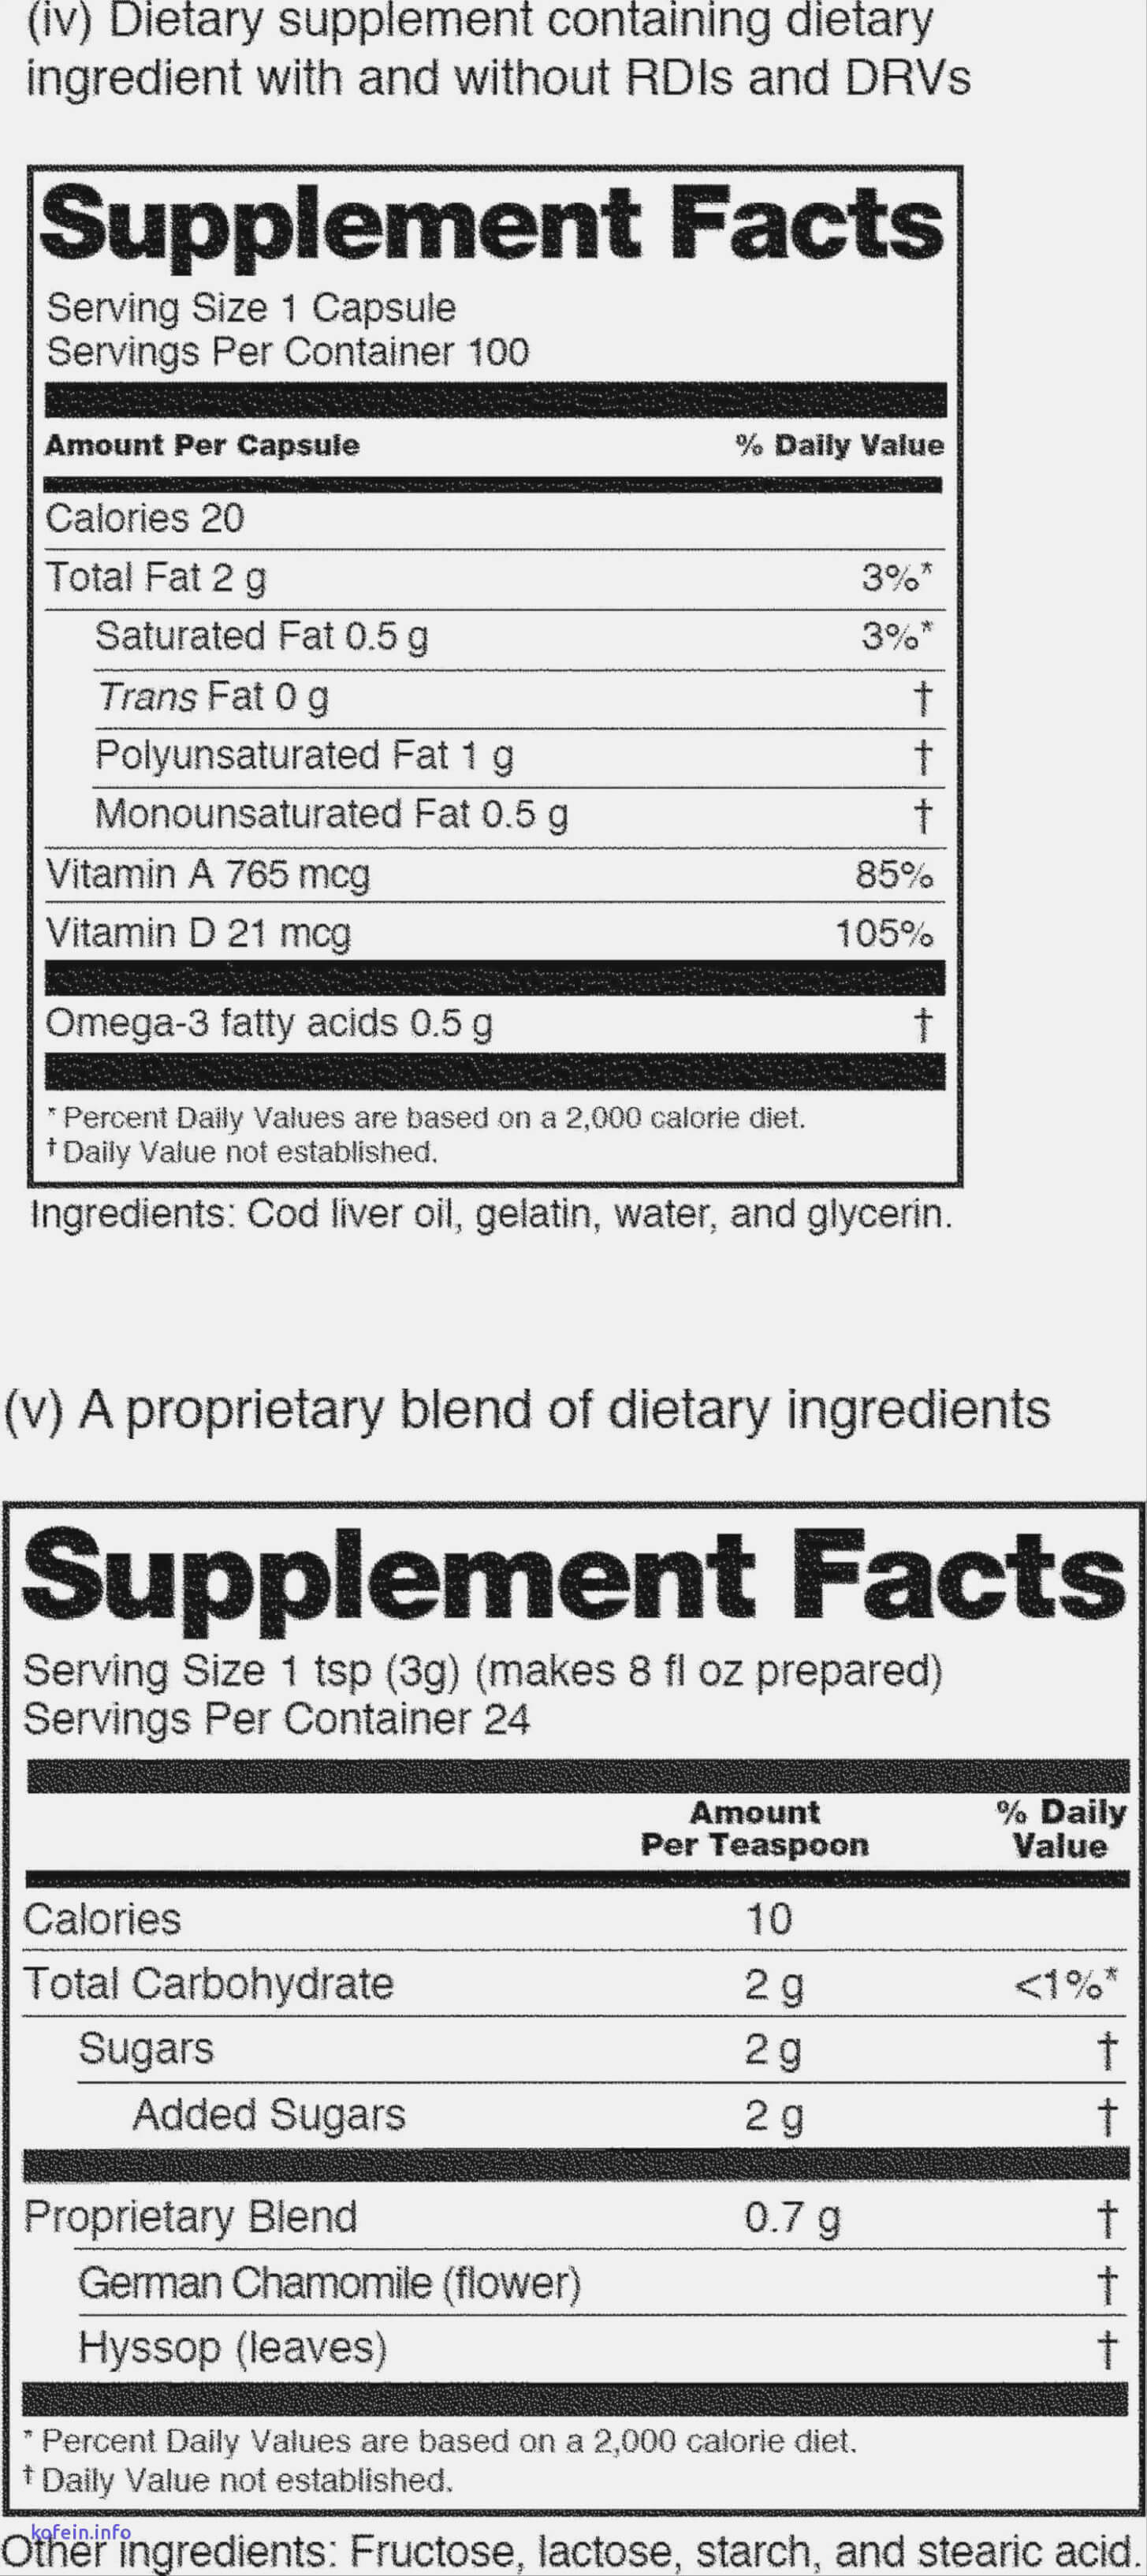 Nutrition Facts Label Template Microsoft Word – Major With Nutrition Label Template Word